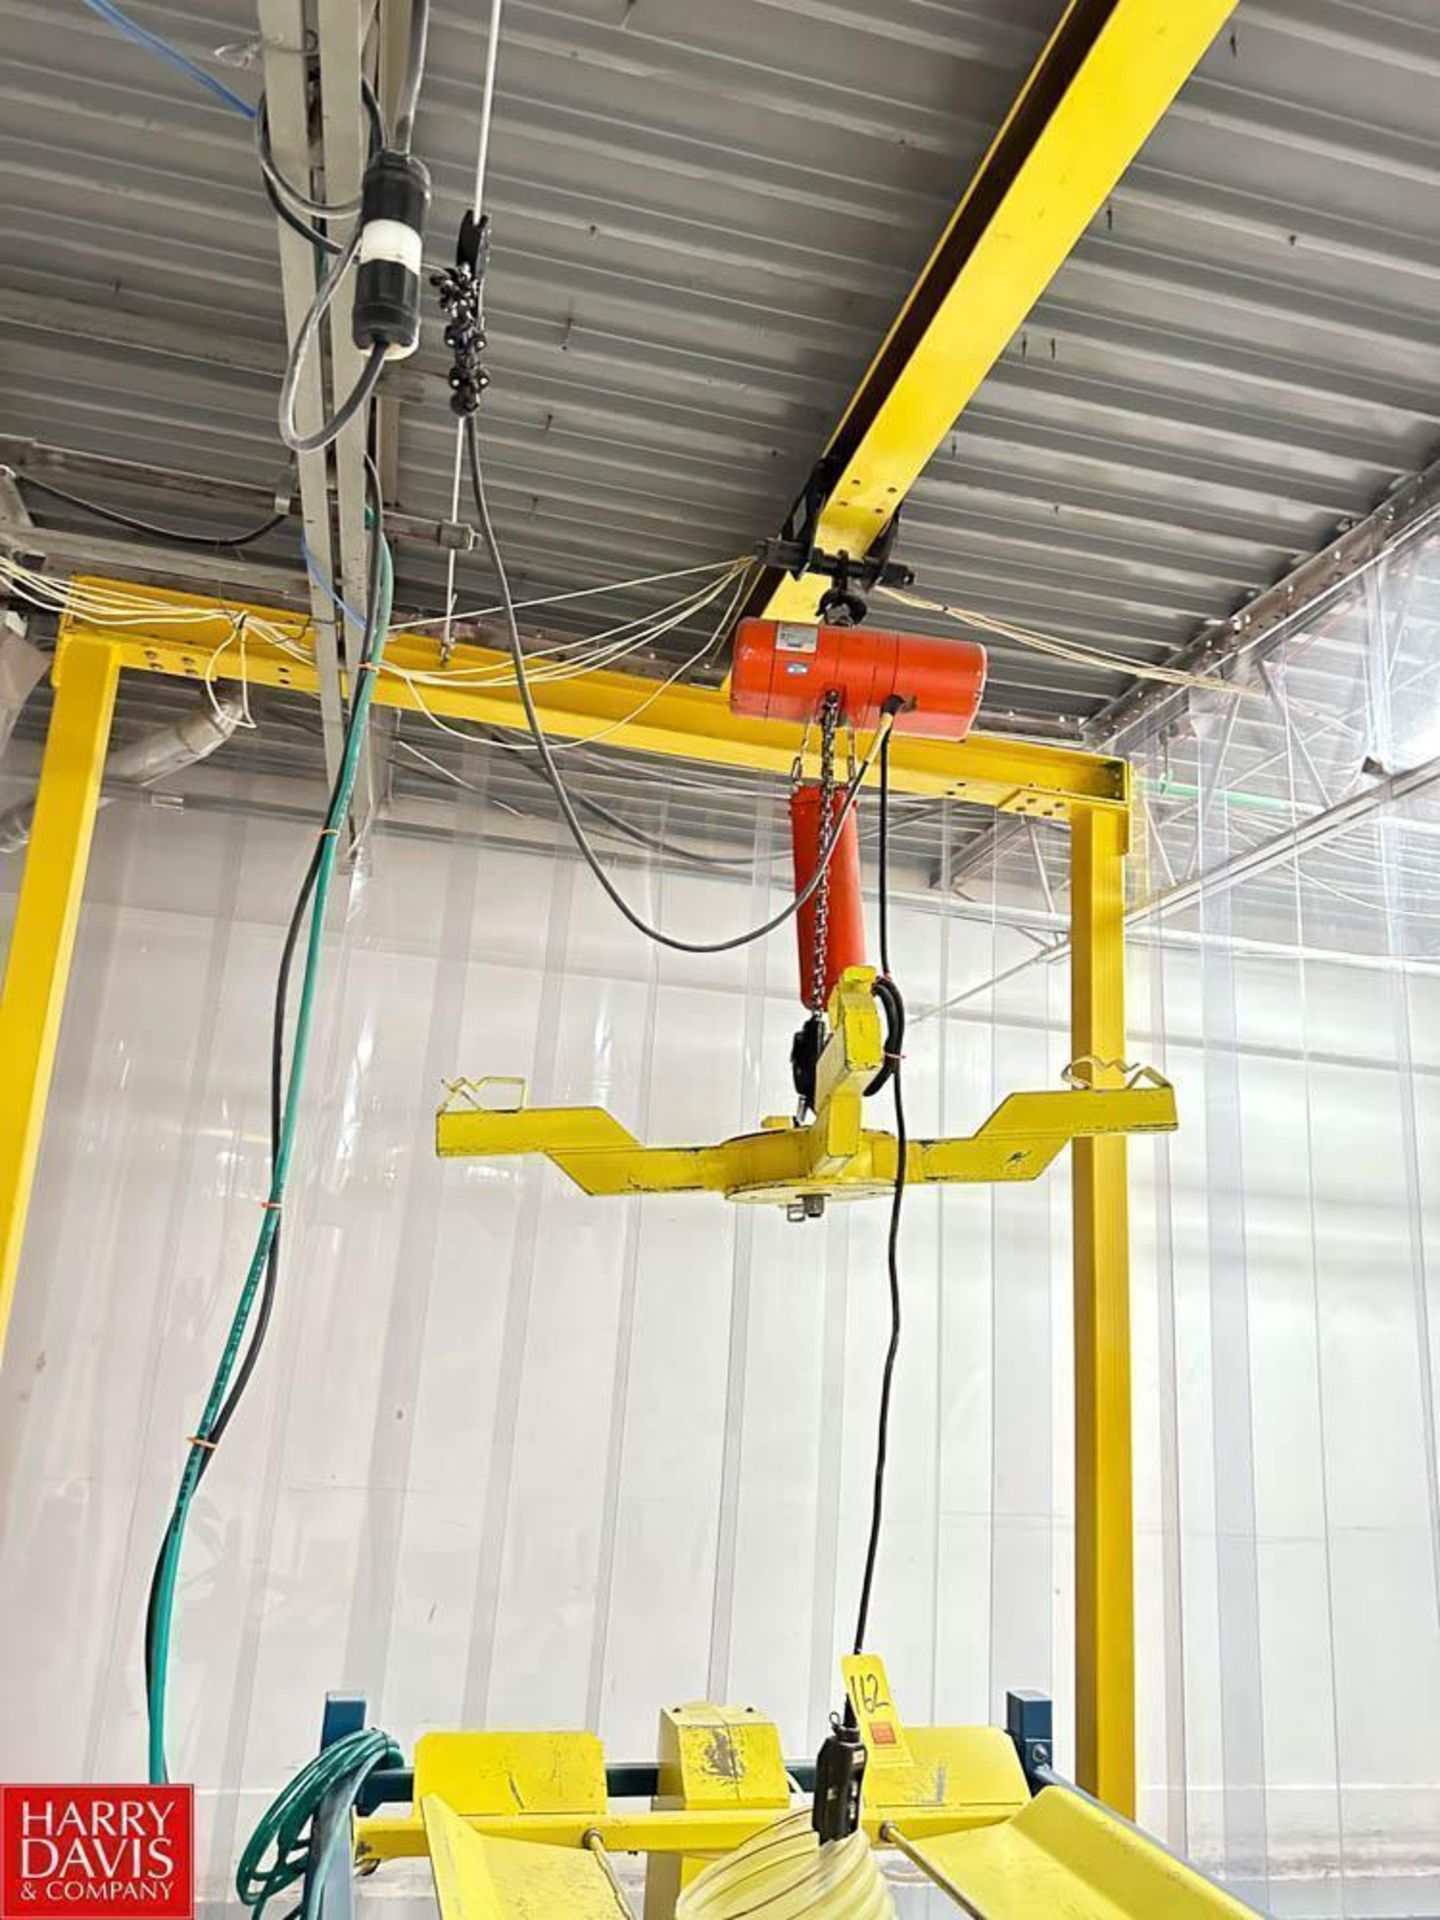 CM Lodestar 1 Ton Electric Chain Hoist with Gantry System - Rigging Fee: $750 - Image 2 of 4